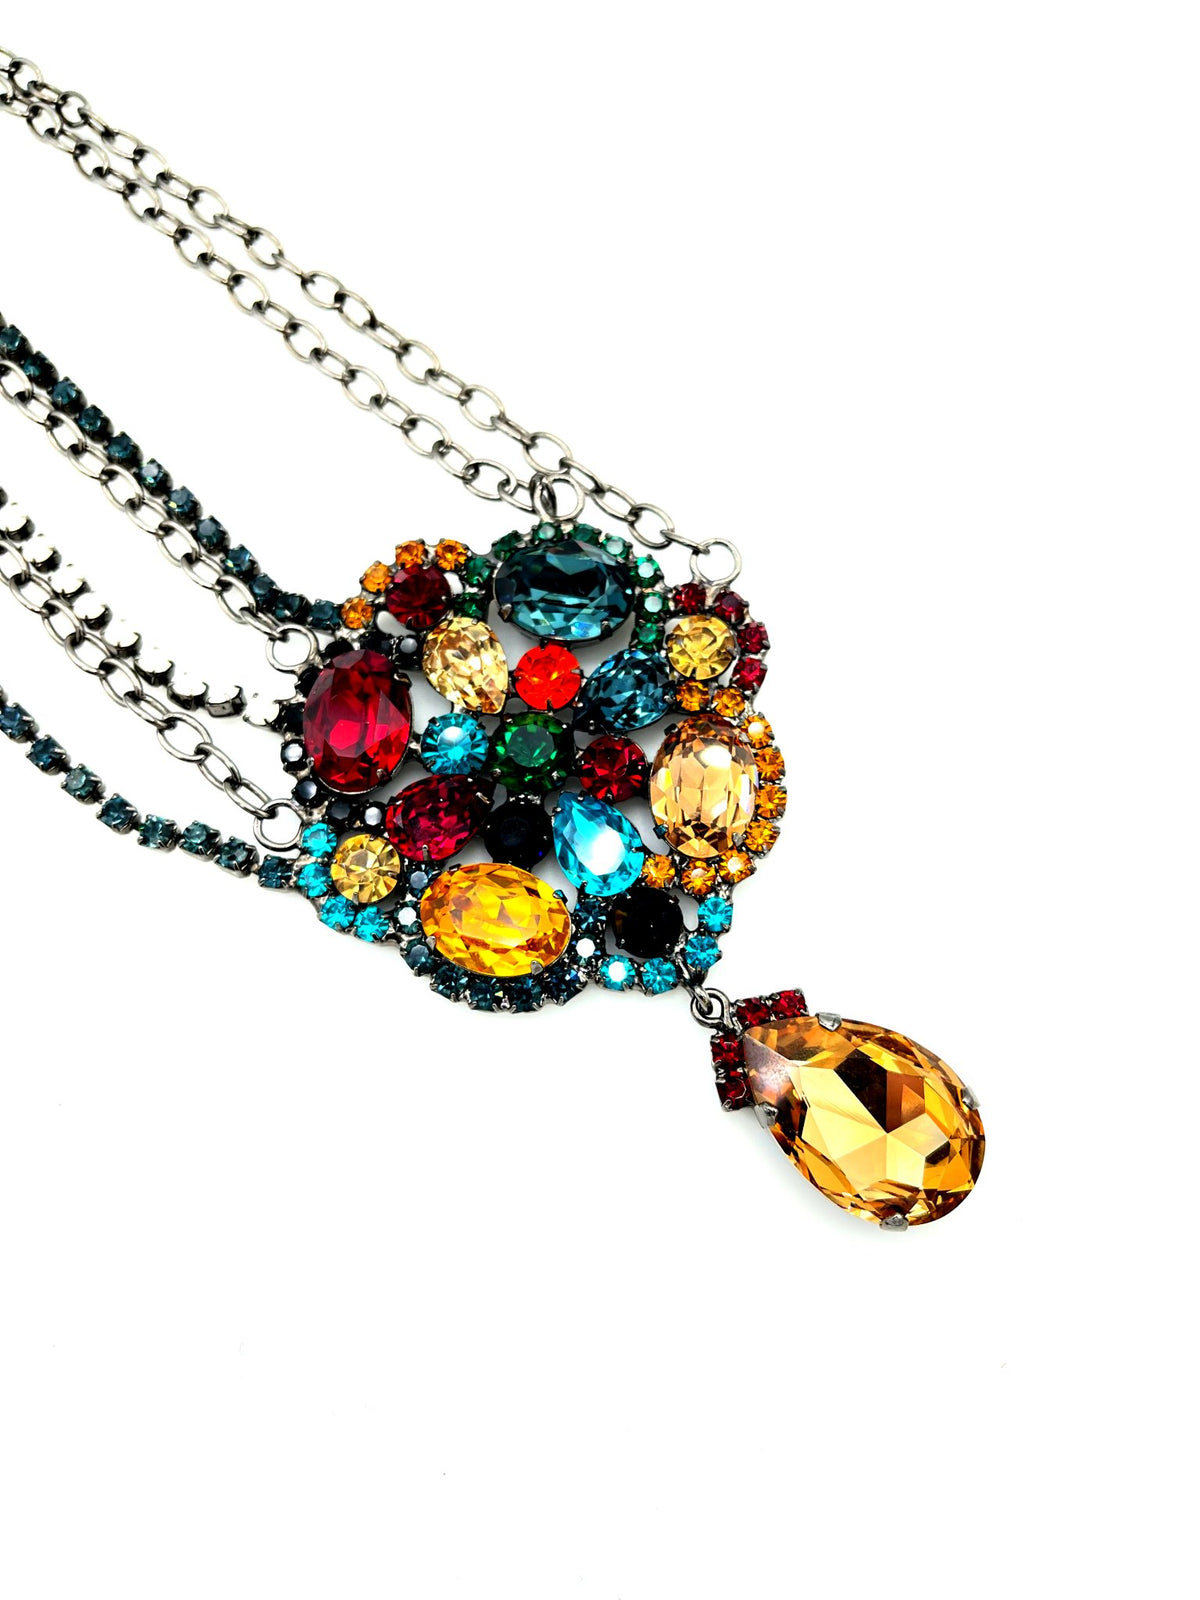 Kenneth Jay Lane Multi-Color Rhinestone Statement Necklace - 24 Wishes Vintage Jewelry